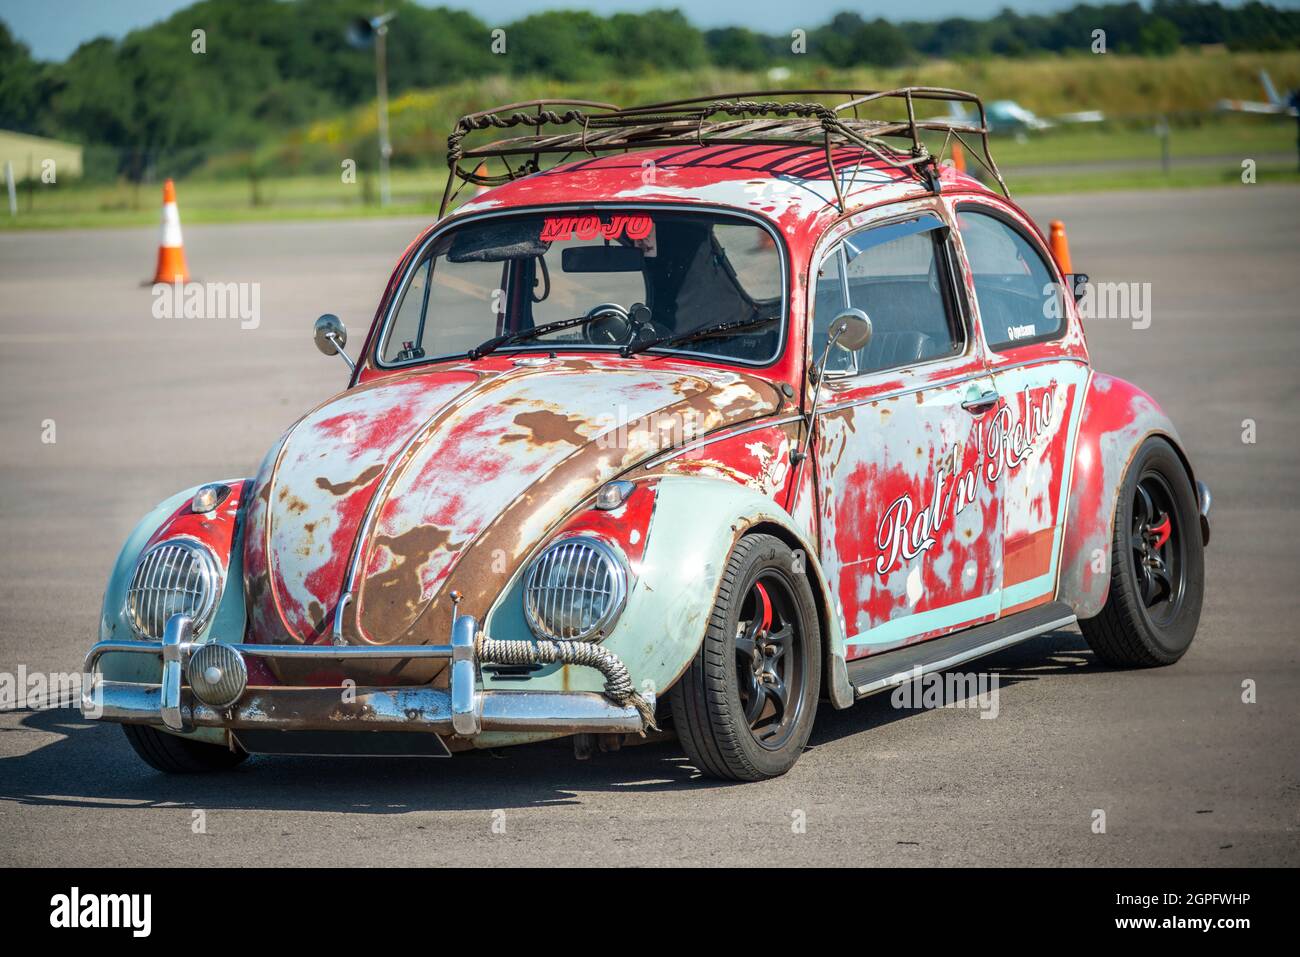 THRUXTOM,HAMPSHIRE/UNITED KINGDOM-JULY 17 2021: A customized and distressed Volkswagon Beetle sits at at Thruxton Motorsport Centre on Saturday. Stock Photo